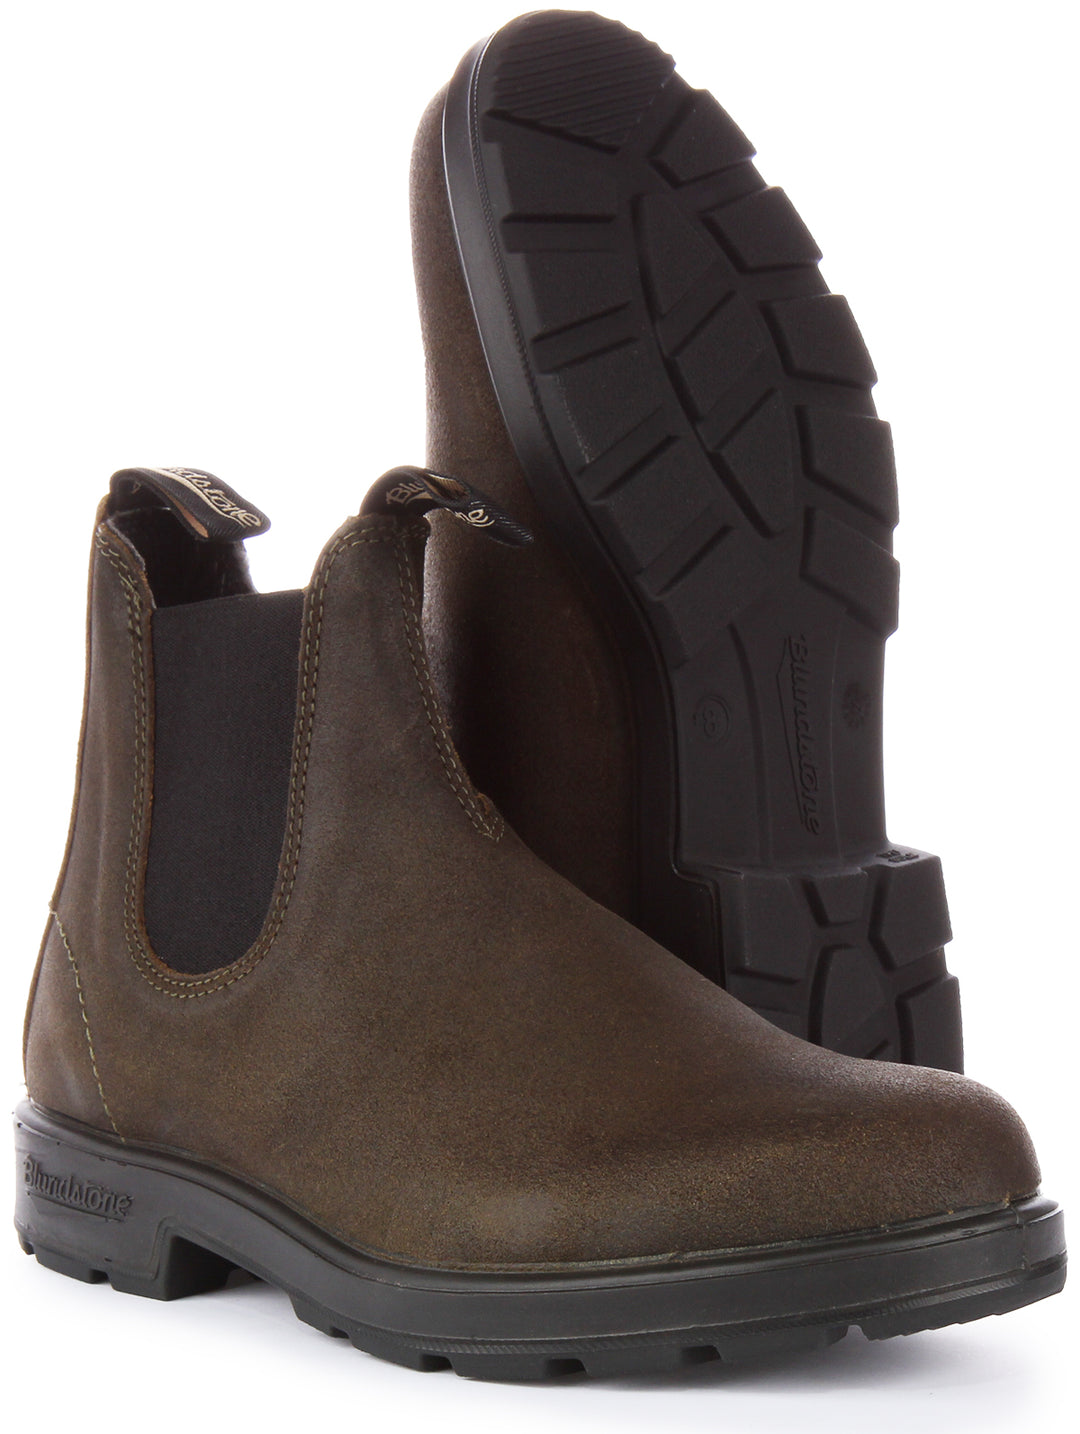 Blundstone 1615 In Olive For Unisex